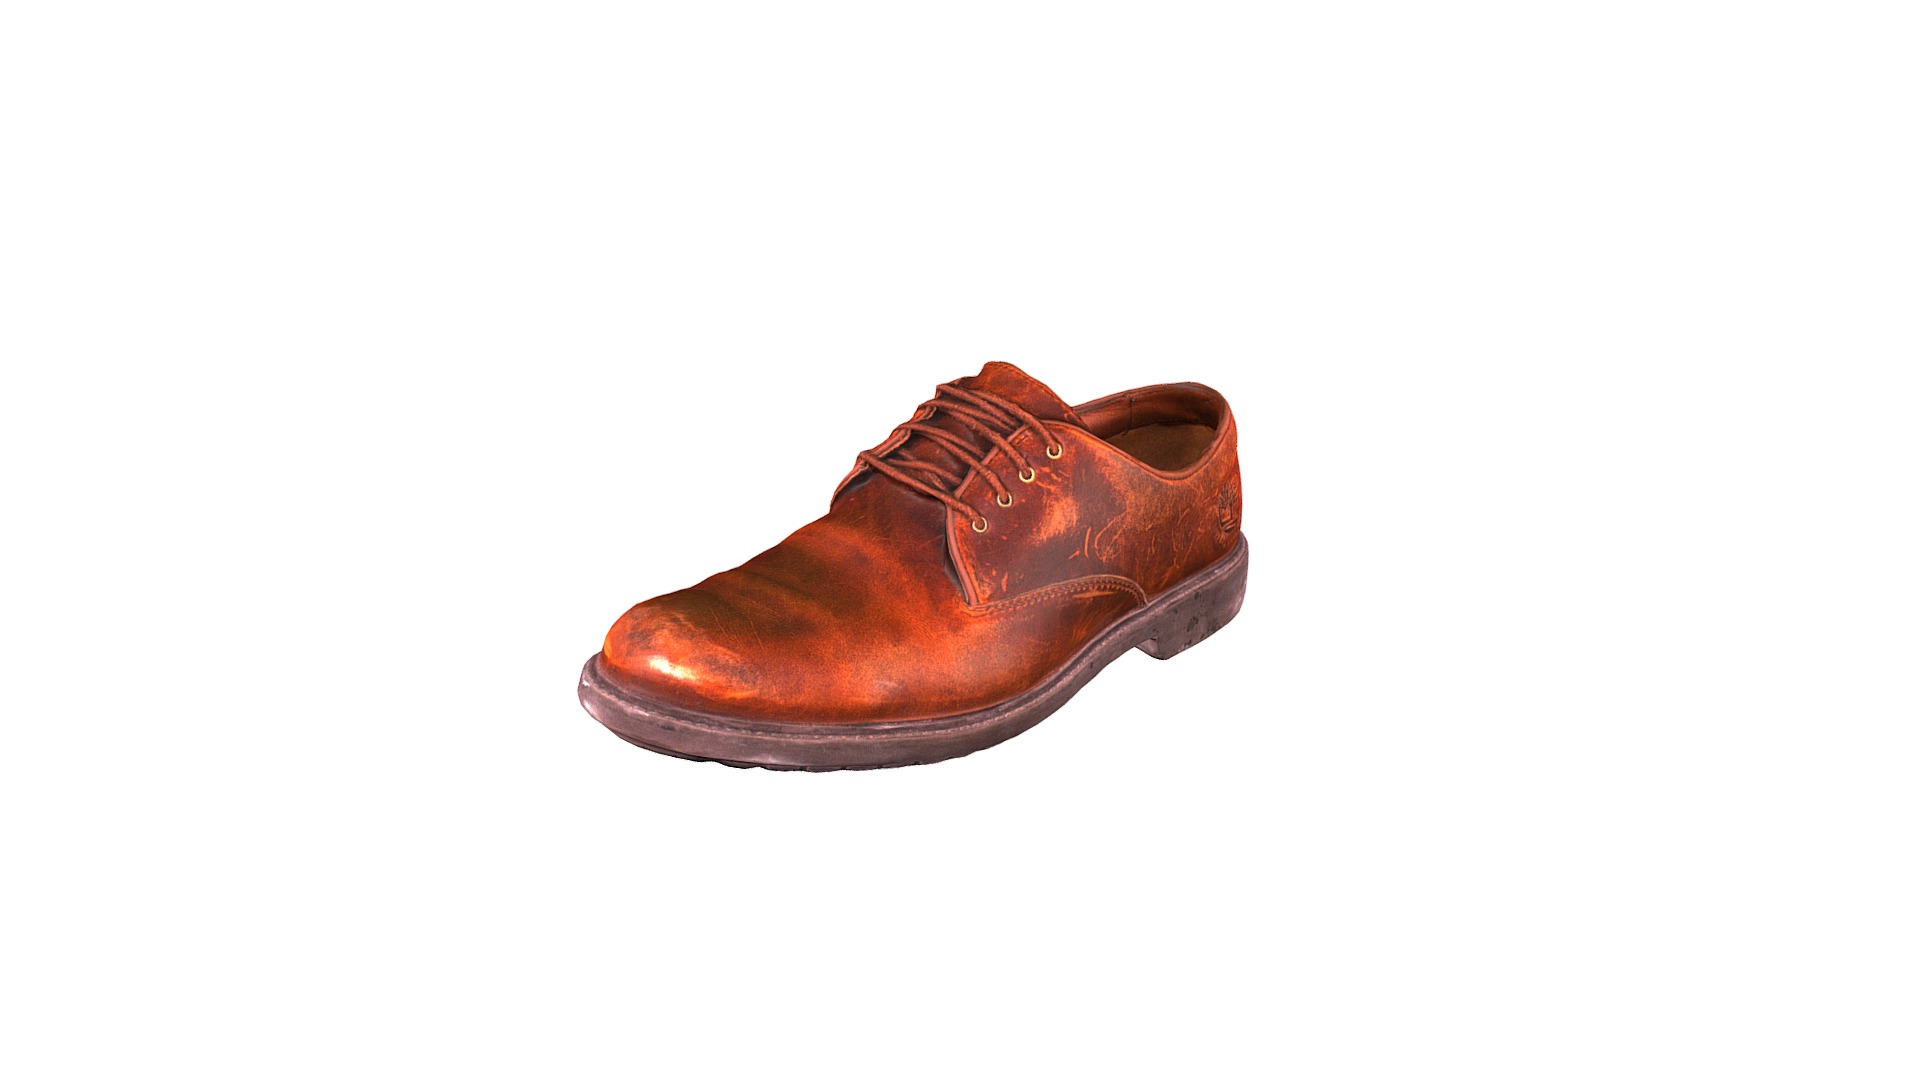 3D model Timberland Earthkeepers Used - This is a 3D model of the Timberland Earthkeepers Used. The 3D model is about a brown leather shoe.